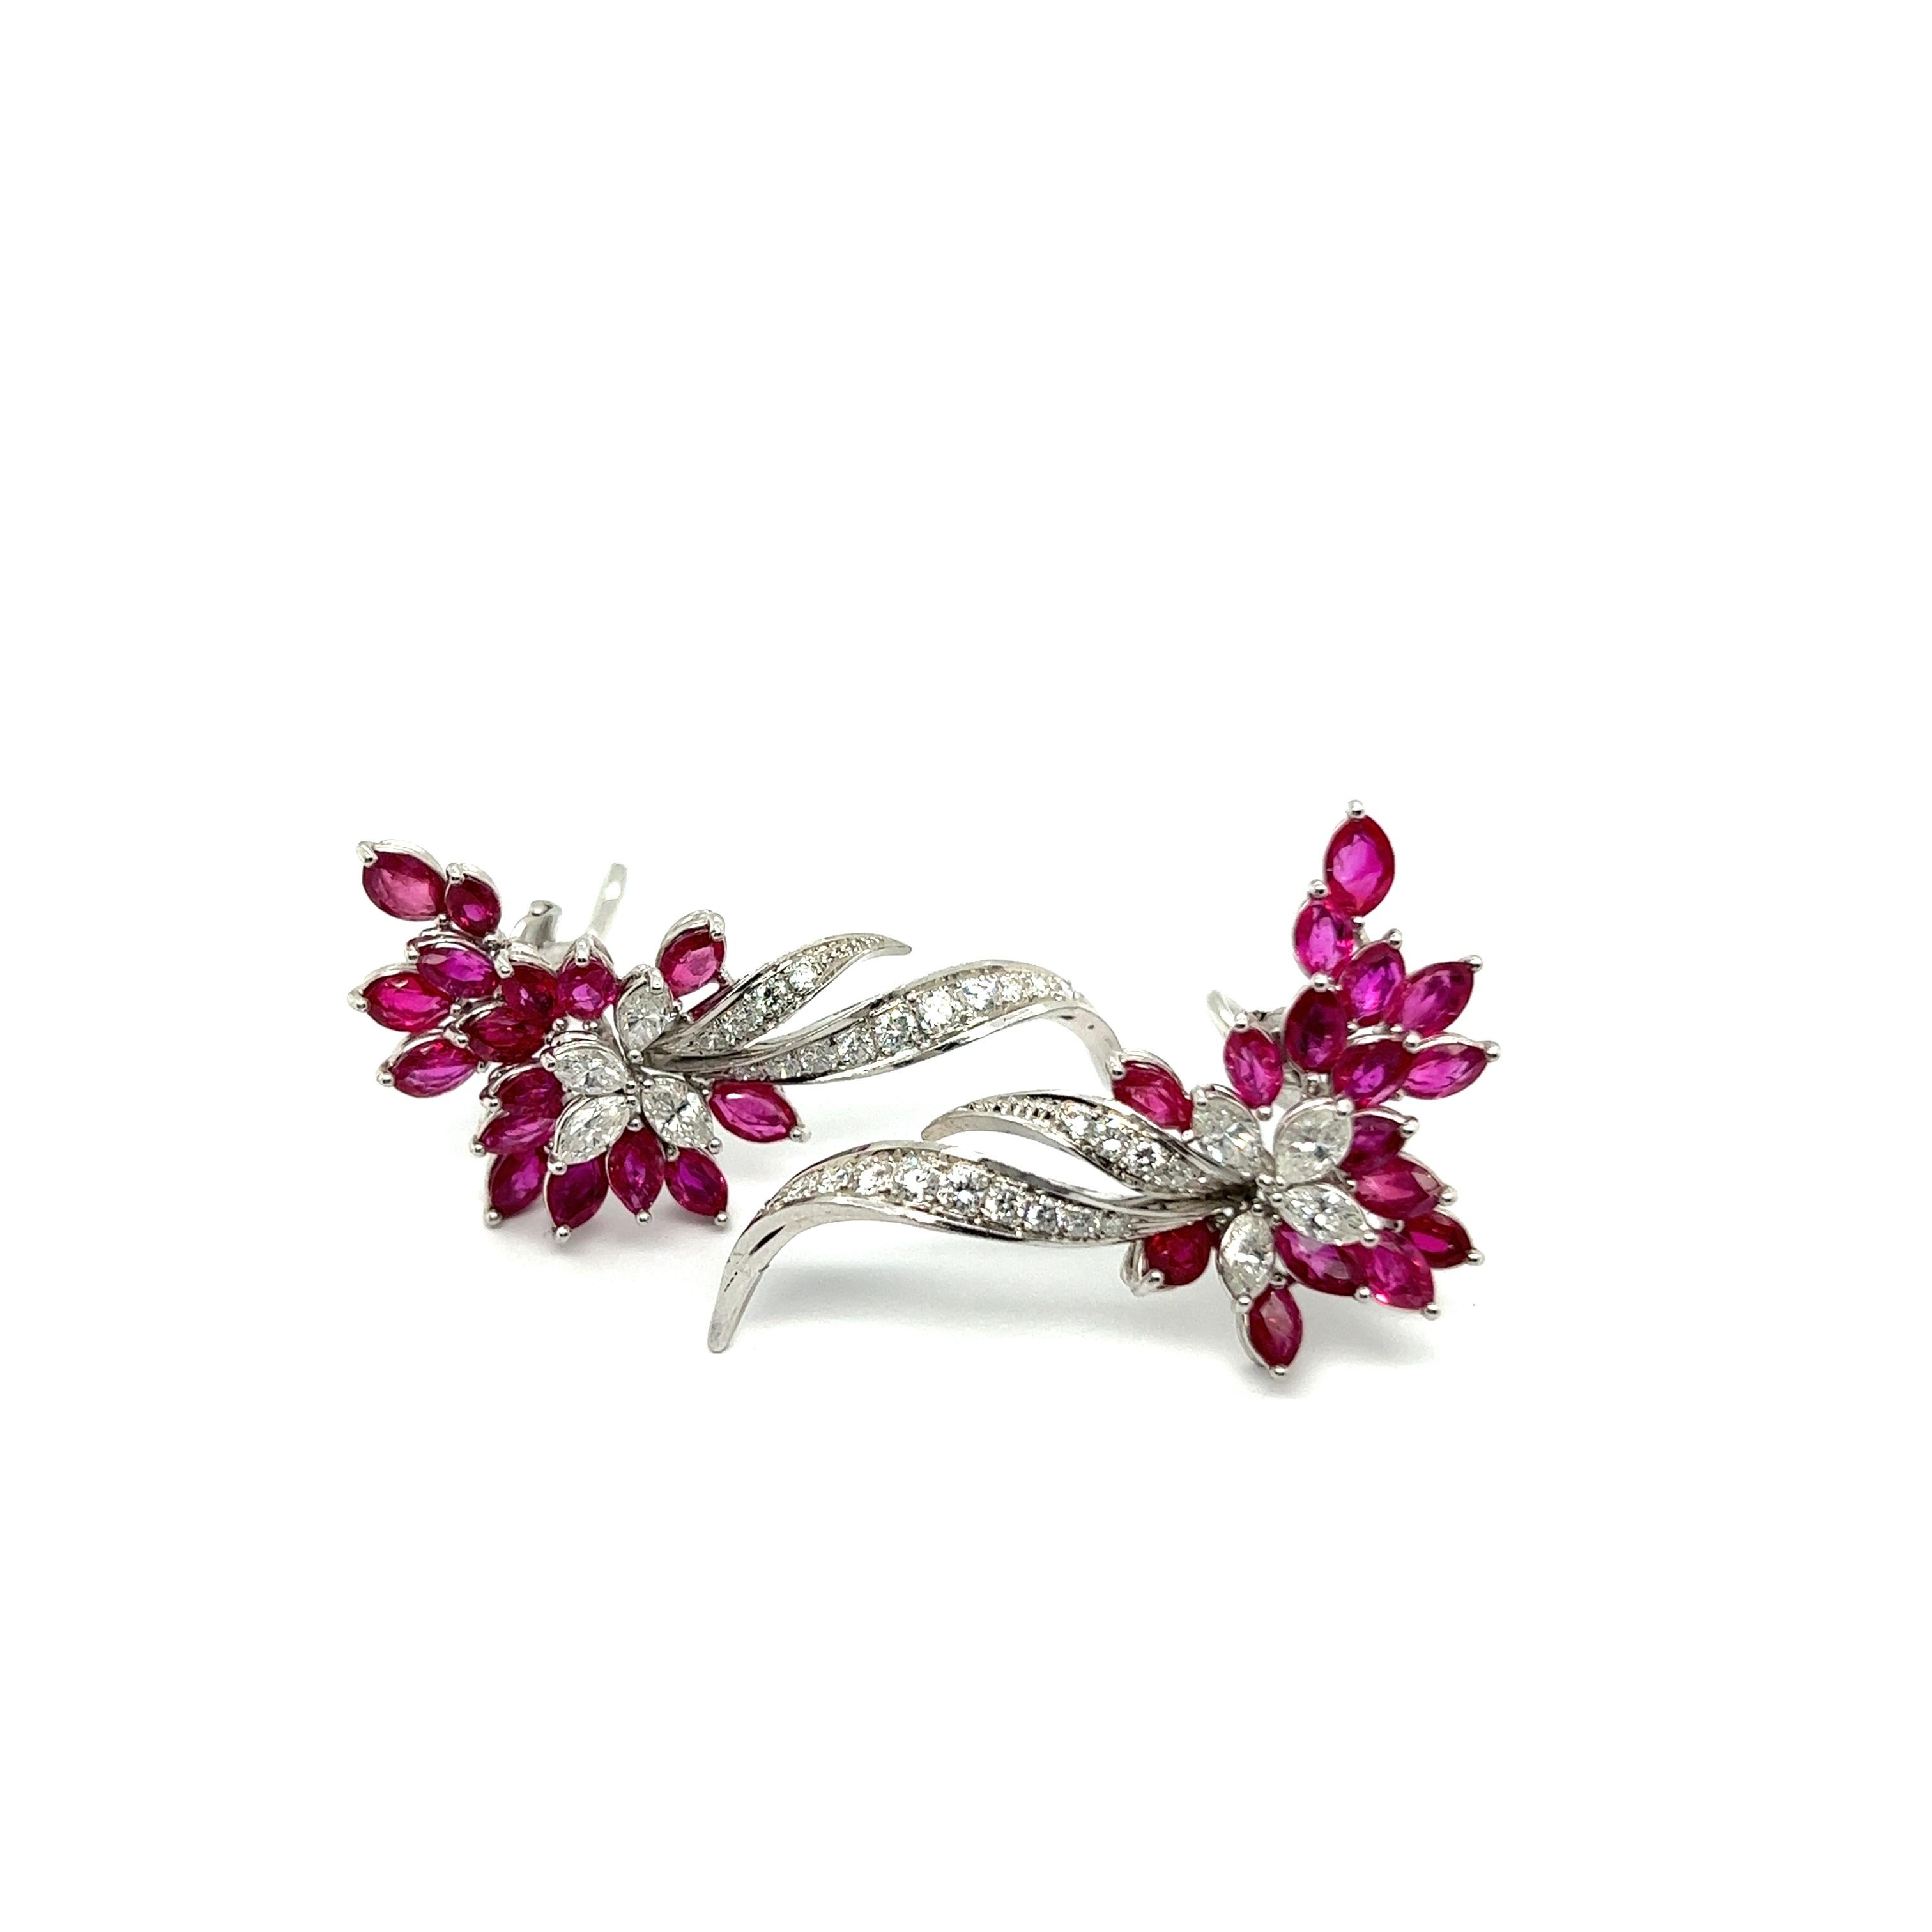 Blossom Clip-on Earrings with Rubies & Diamonds in 18 Karat White Gold In Excellent Condition For Sale In Lucerne, CH